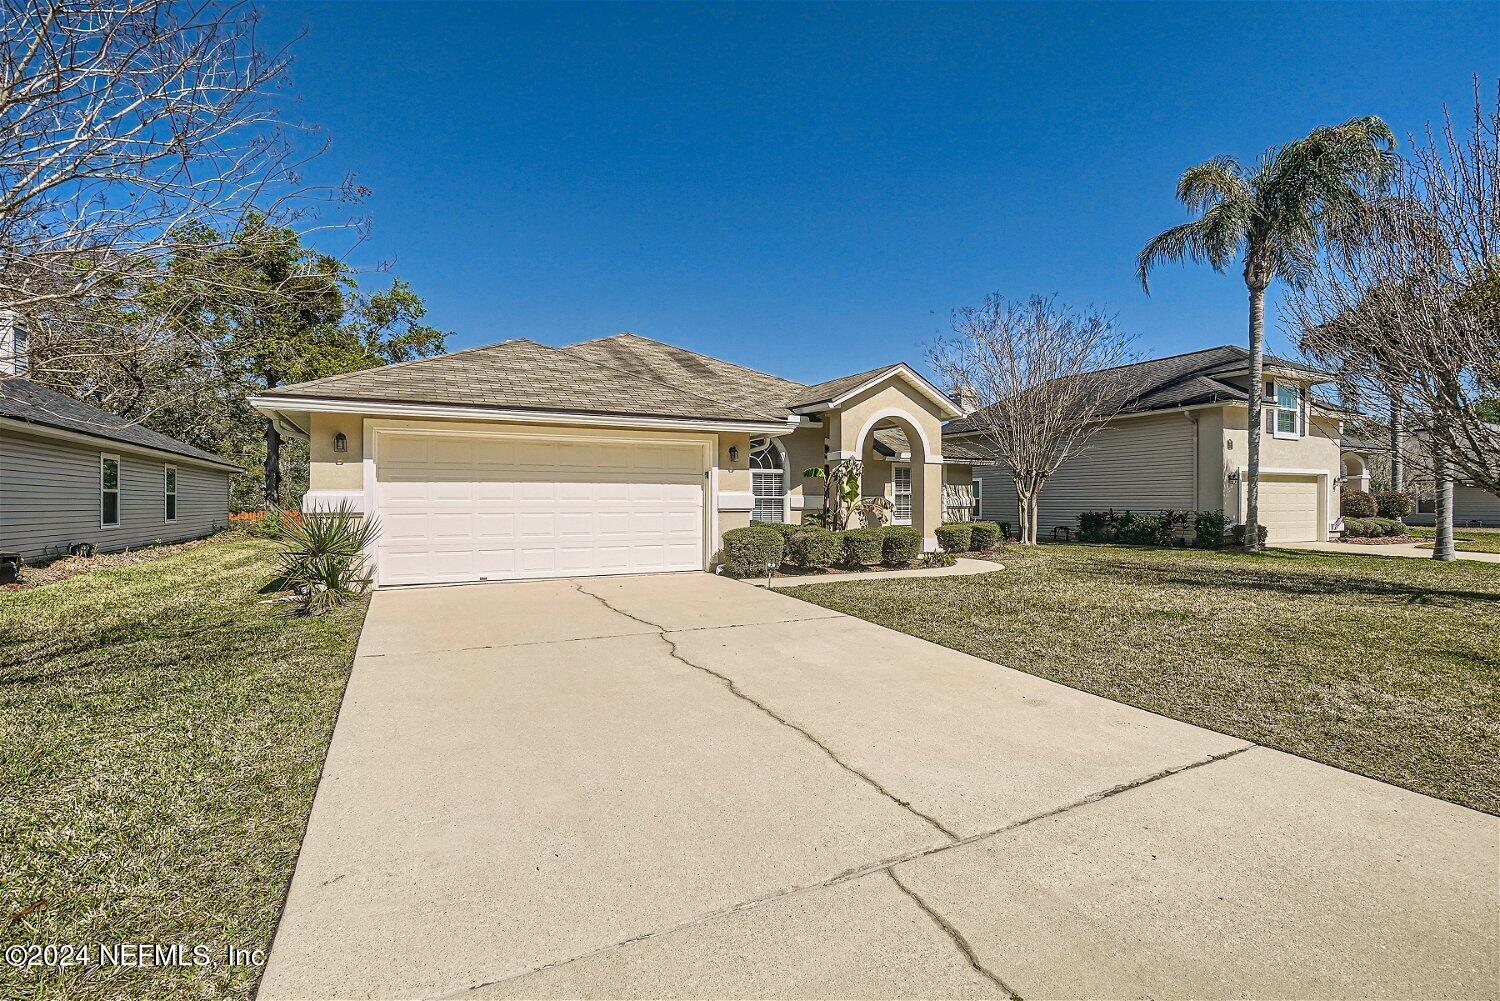 St Johns, FL home for sale located at 112 GLEN OAKS Drive, St Johns, FL 32259